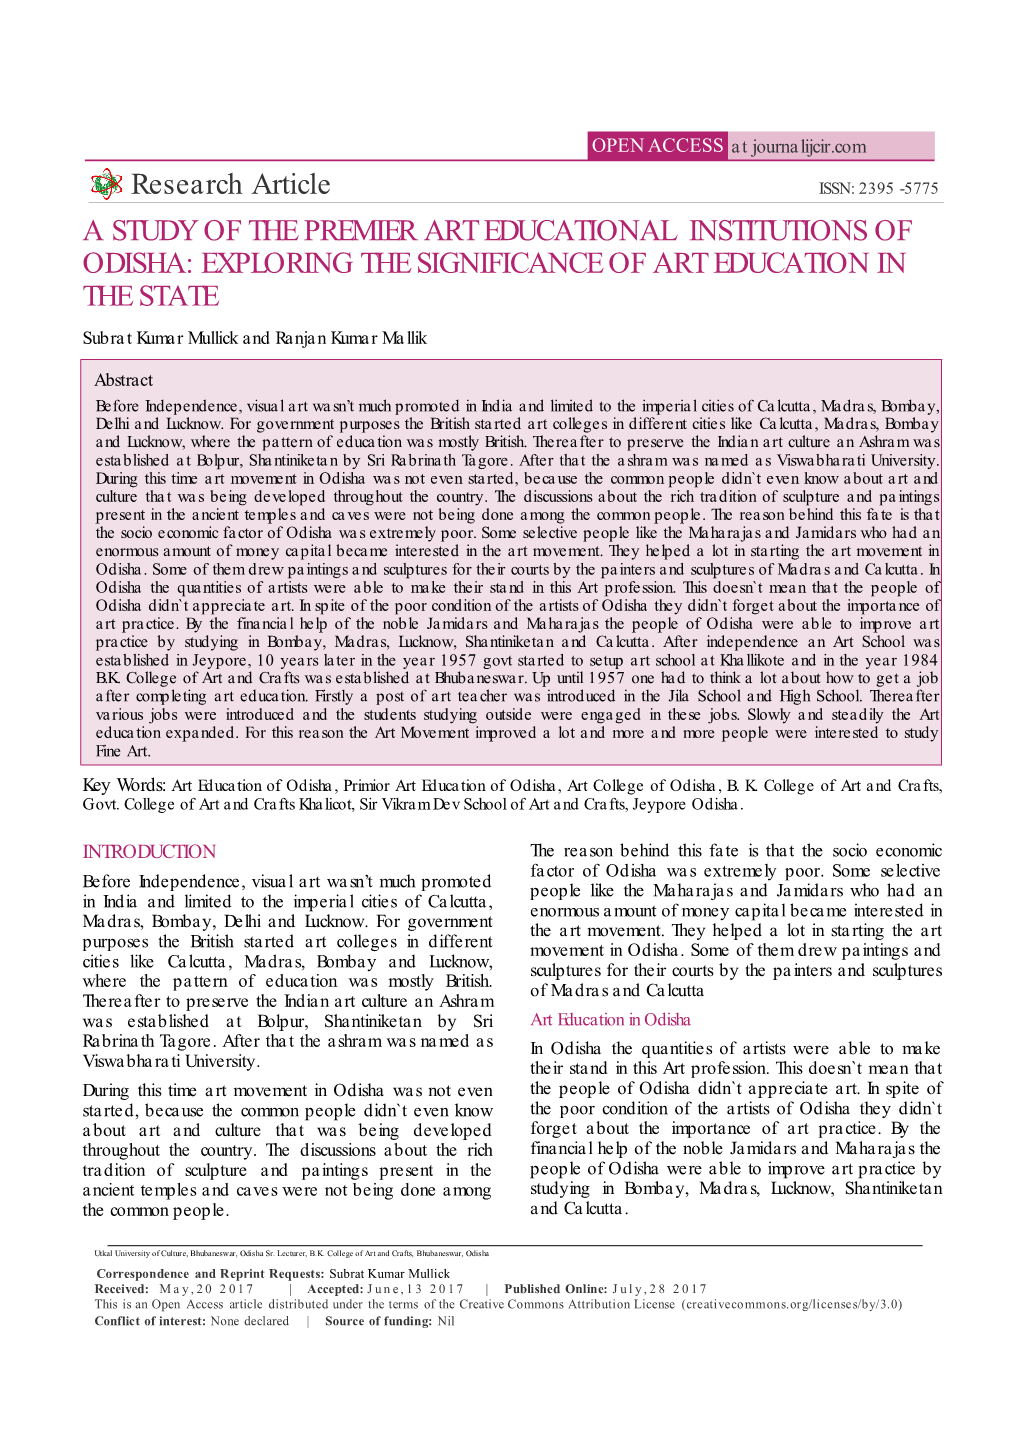 Research Article a STUDY of the PREMIER ART EDUCATIONAL INSTITUTIONS of ODISHA: EXPLORING the SIGNIFICANCE of ART EDUCATION